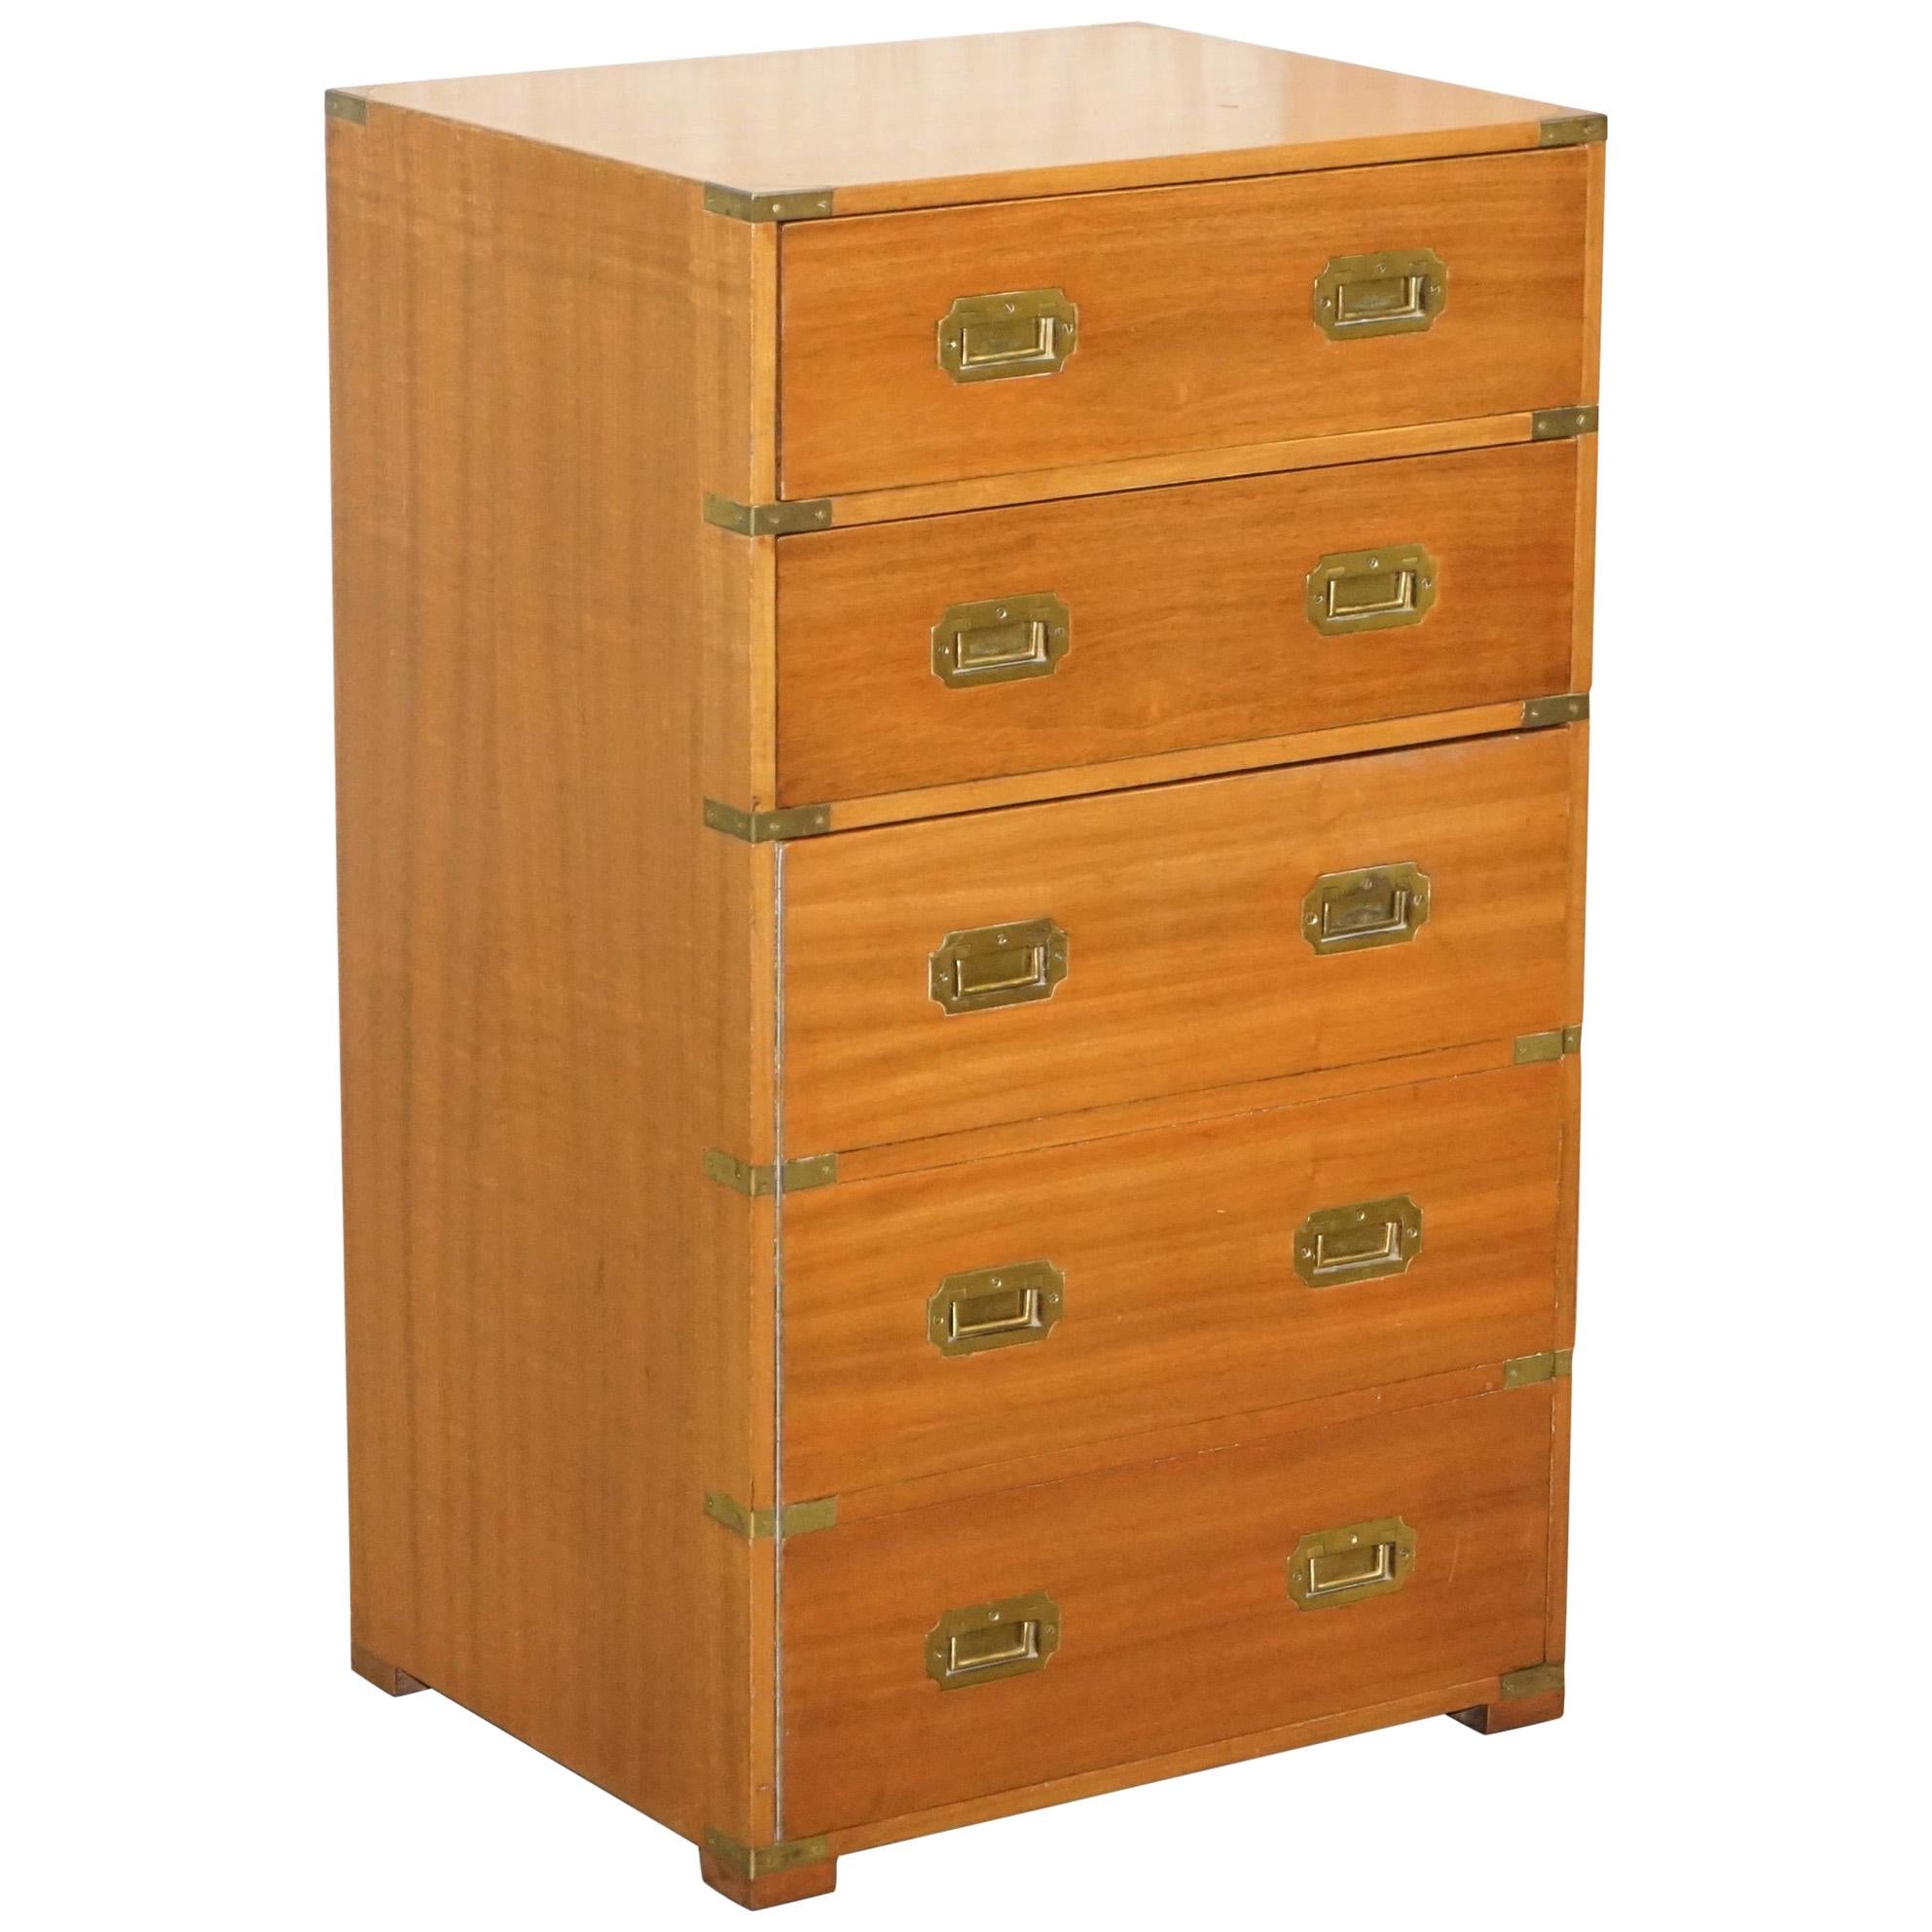 Lovely Vintage Military Campaign Chest of Drawers with Hidden Cupboard Base